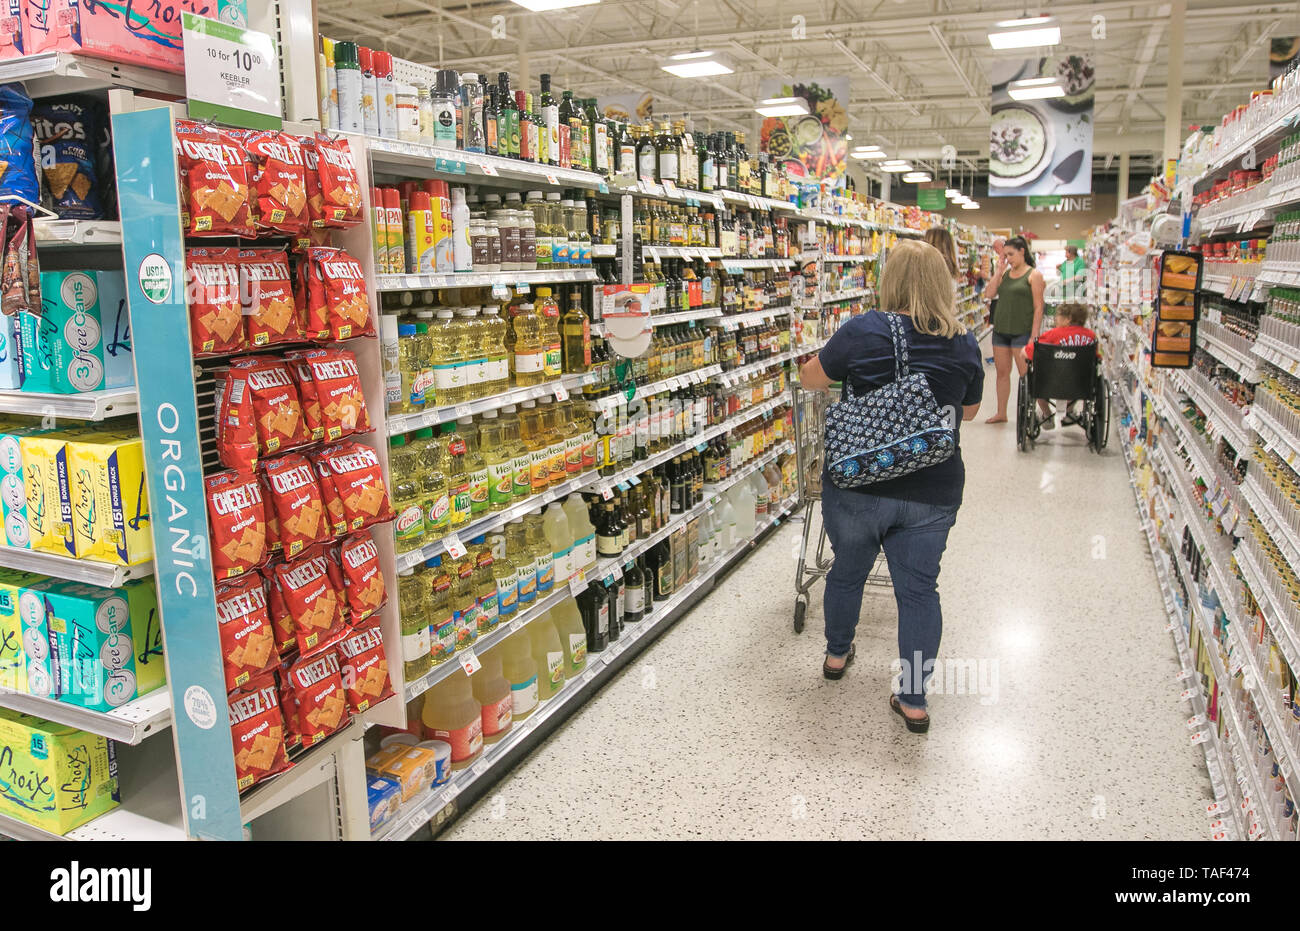 Fort Lauderdale, FL, 5/15/2019: People are shopping at a Publix supermarket. Stock Photo